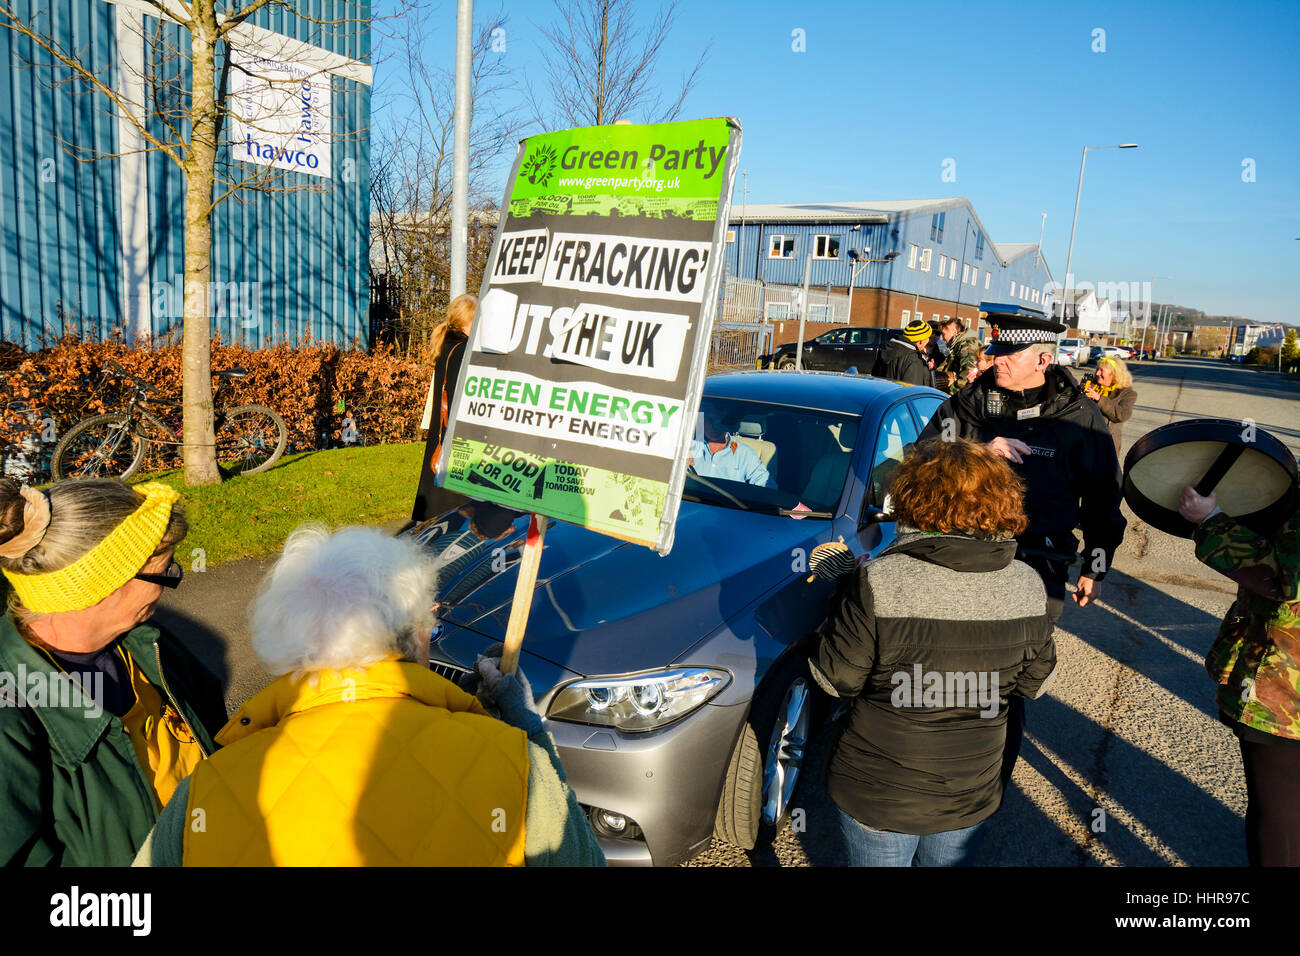 Bolton Lancashire, UK. 20th January 2017: A small group of protesters blocked the entrance to A E Yates business premises near the Bolton Wanderers Football stadium today demanding they cease delivering aggregates to the Cuadrilla shalegas site on Preston New Road in Little Plumpton near Blackpool and that they have no further involvement with fracking companies. The aggregate is used to lay foundations for the drillpad and also to allow the heavy supply vehicles onsite without getting bogged down in the soft ground in the field. Credit: Dave Ellison/Alamy Live News Stock Photo